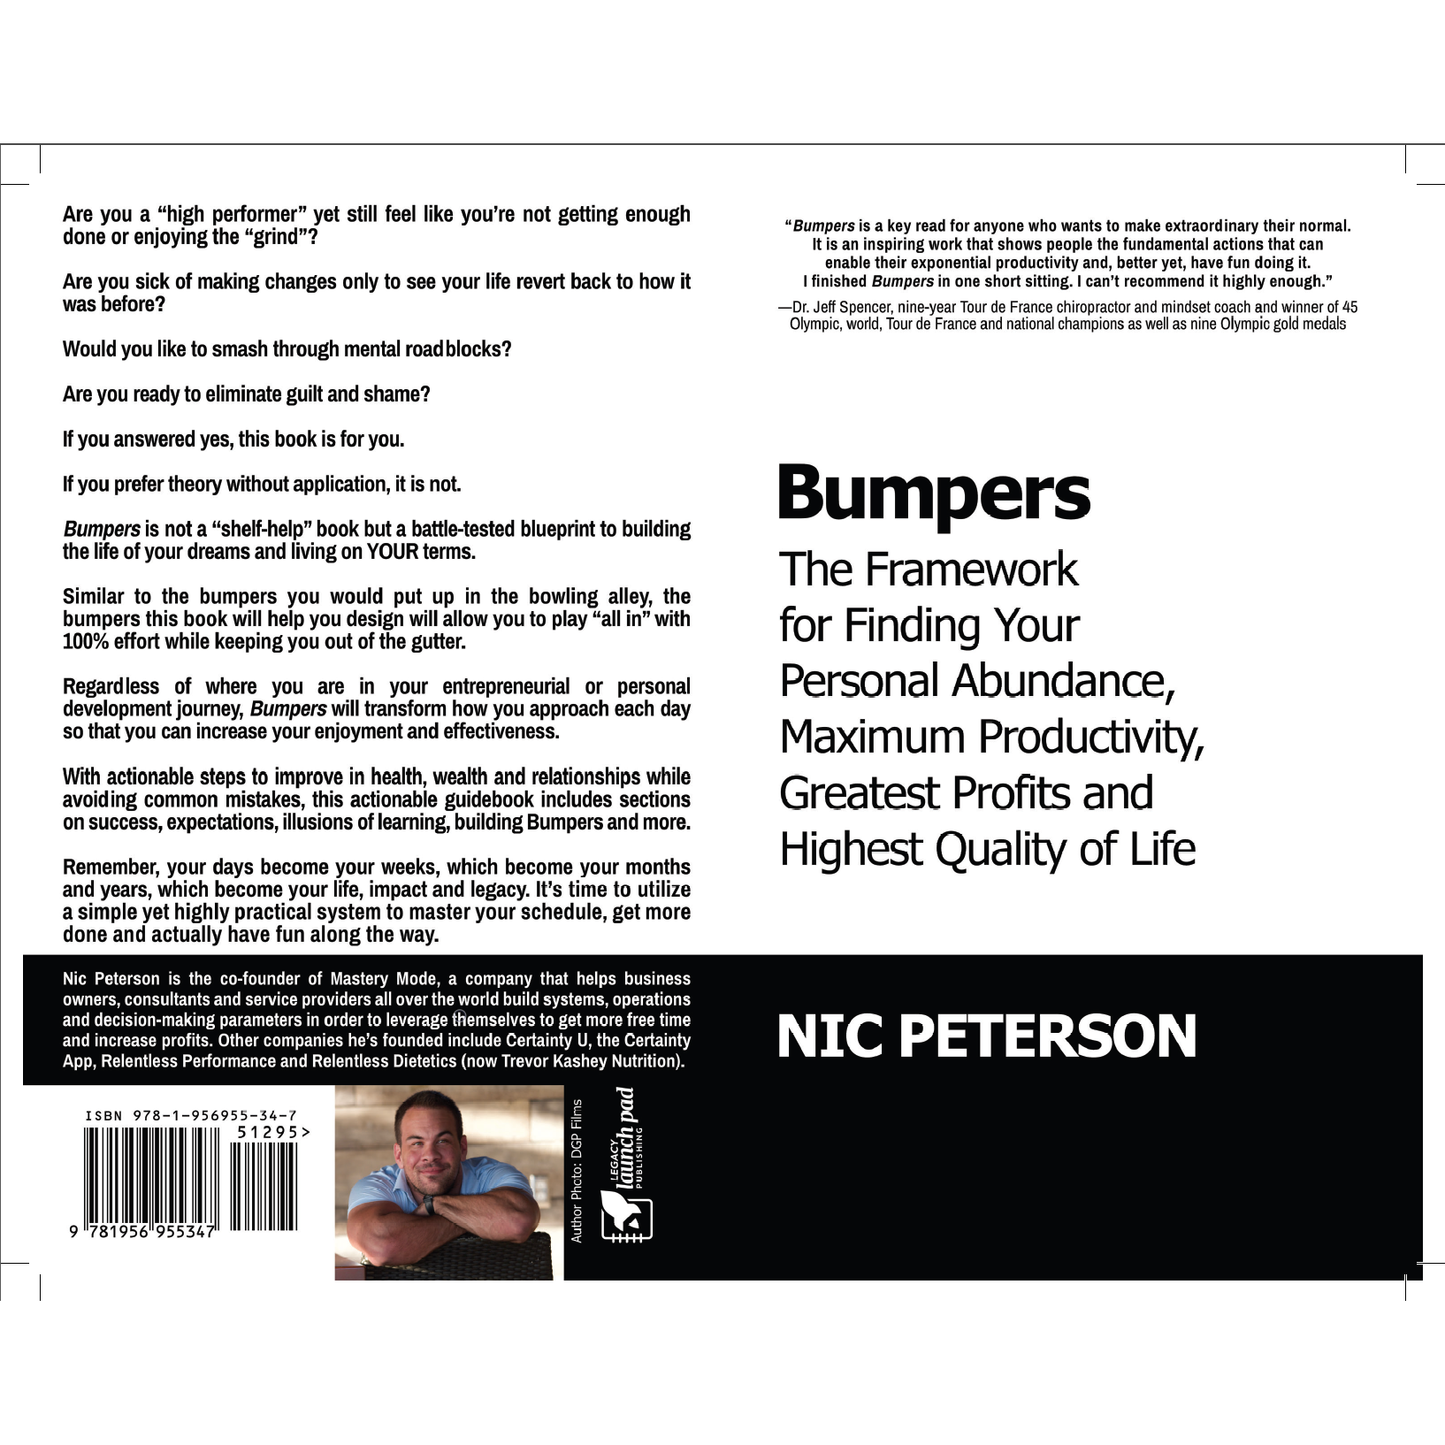 Bumpers digital edition, scorecard, and personalized video